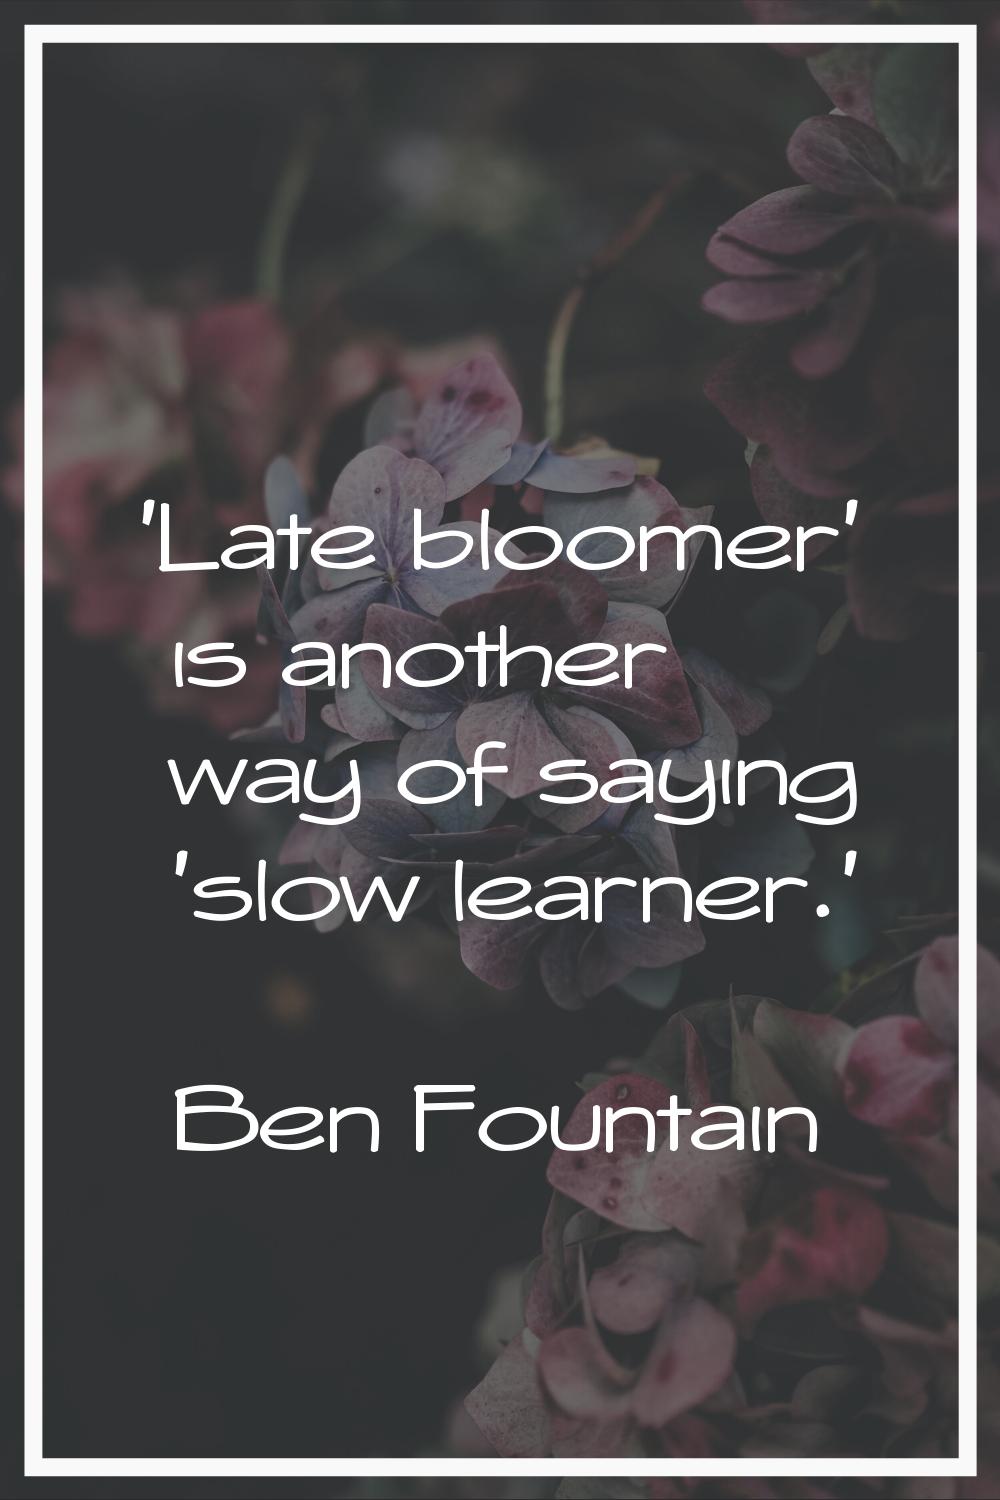 'Late bloomer' is another way of saying 'slow learner.'